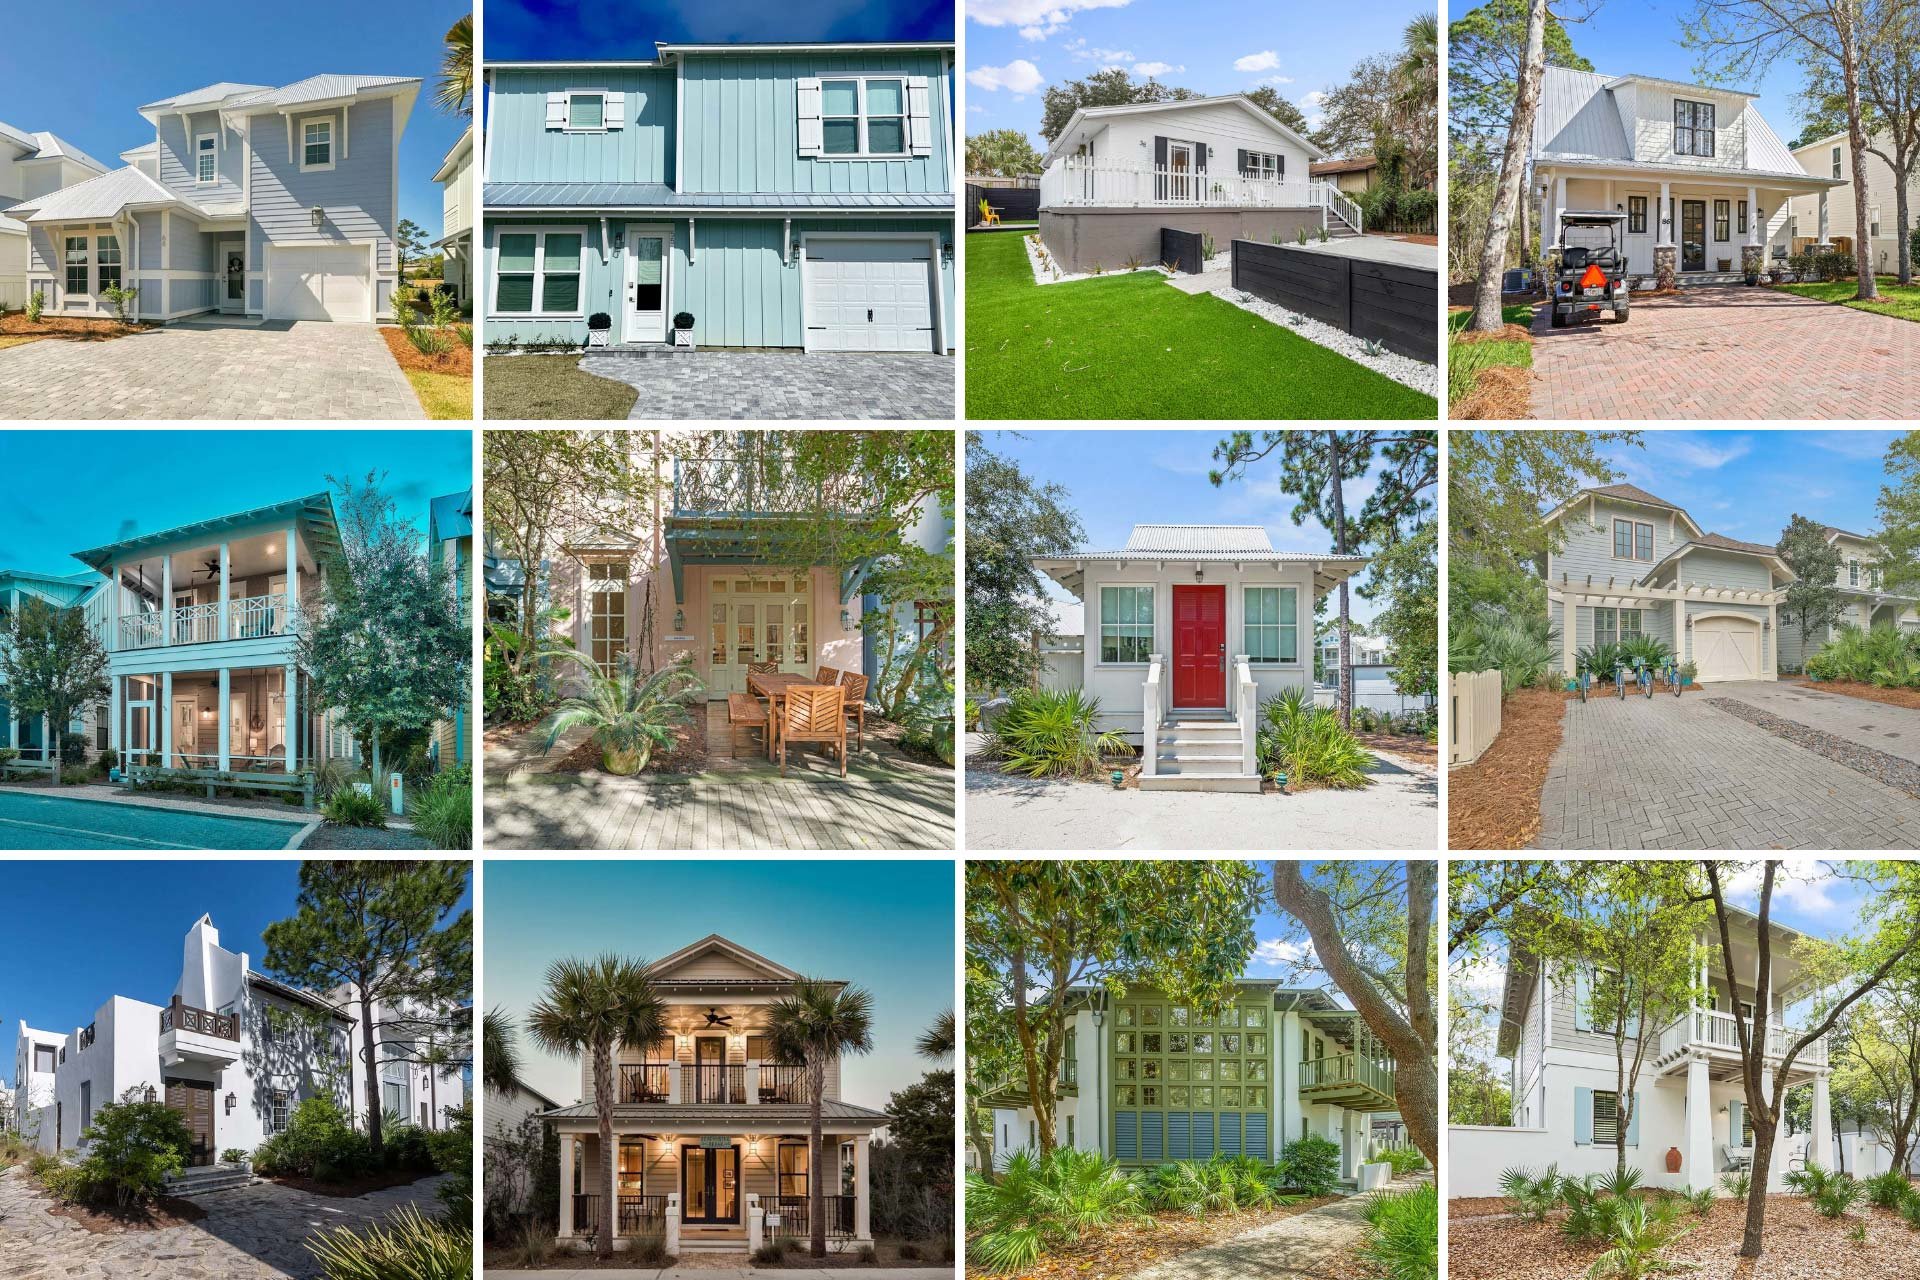 The Most Affordable Home in Each 30A Town